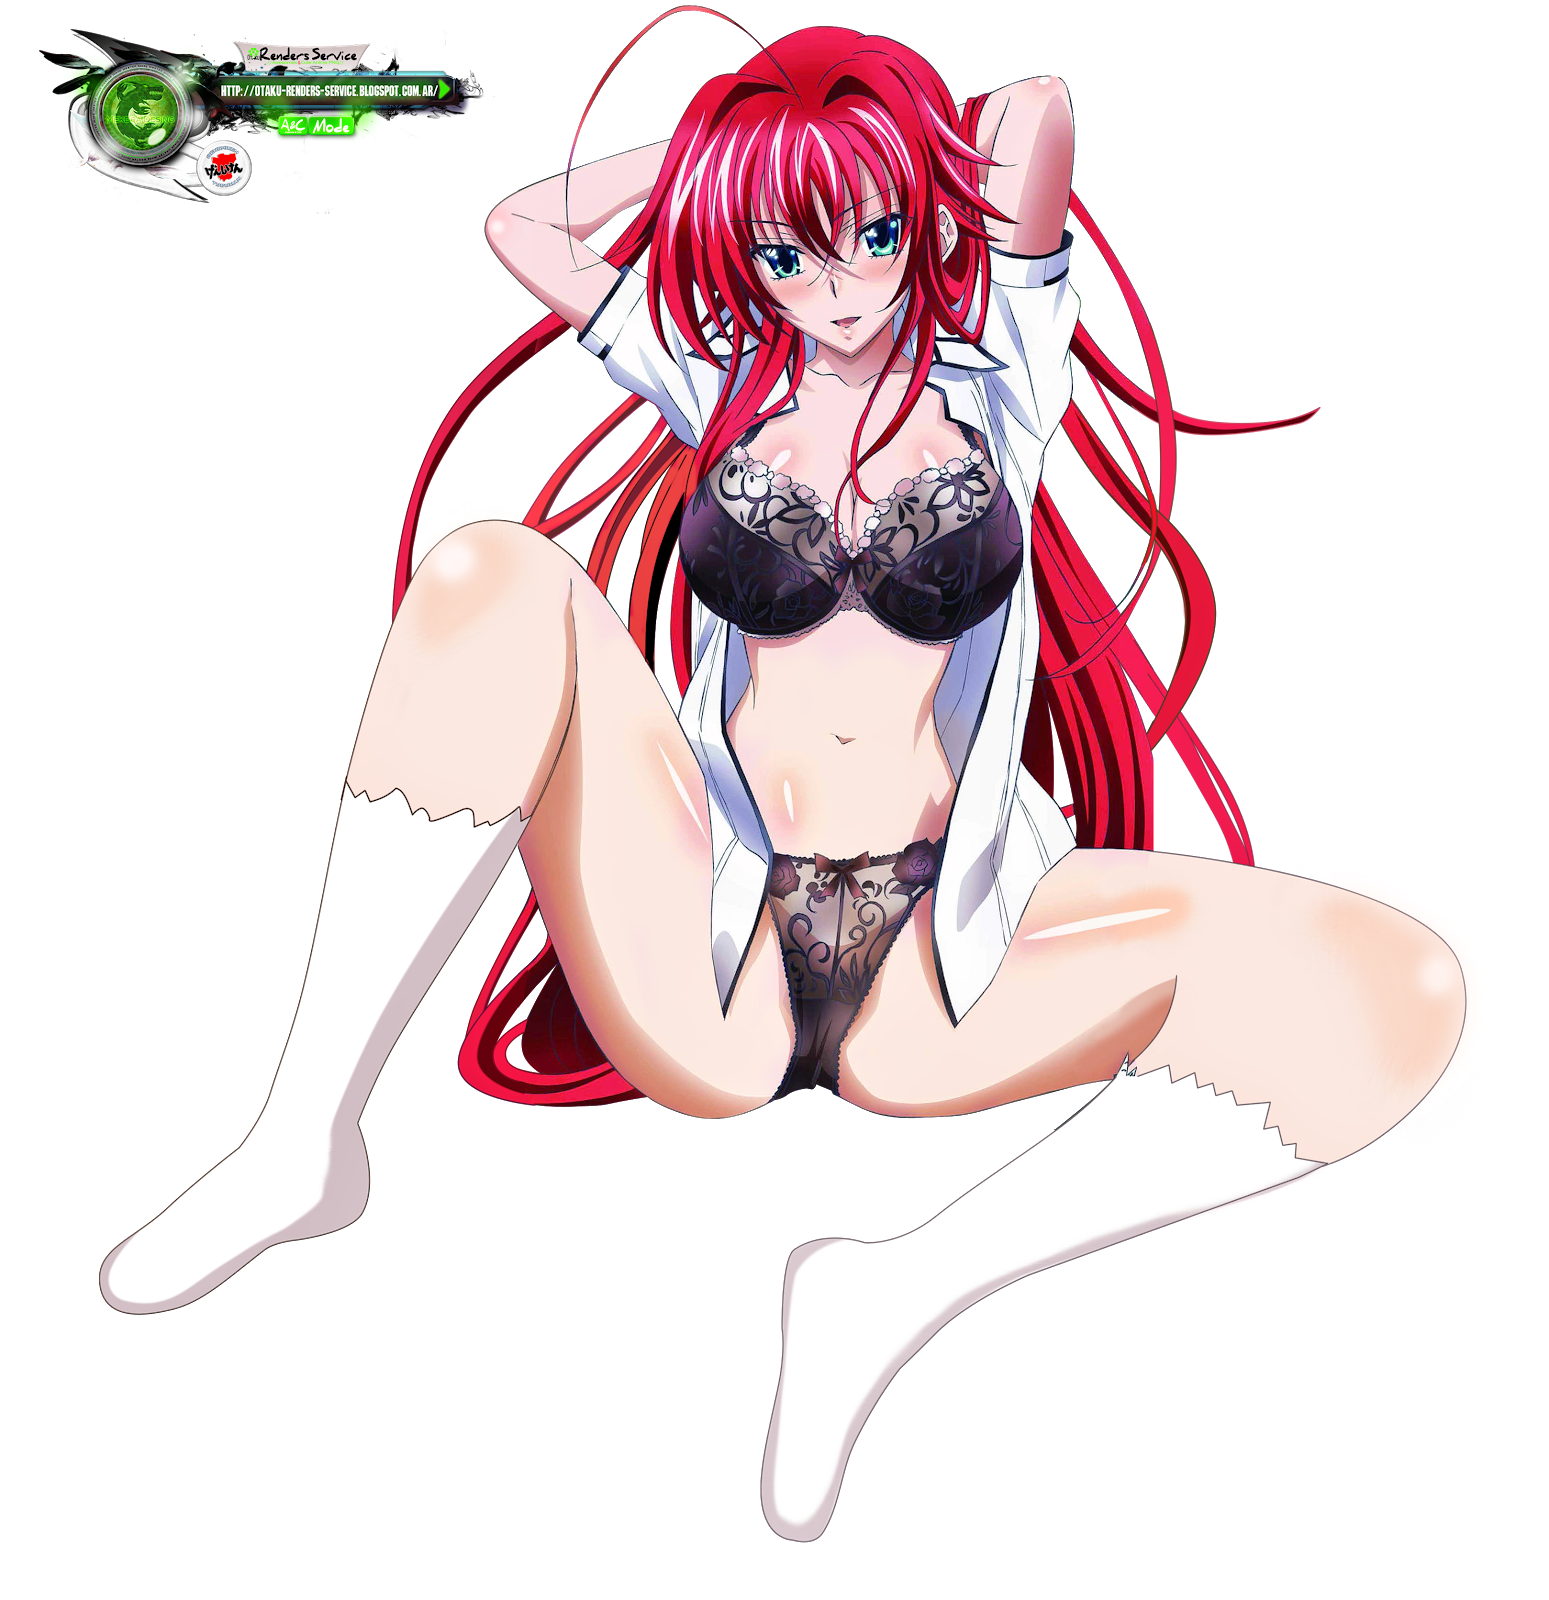 Highschool Dxd Rias Gremory Undresing Sexy Hd Render Ors